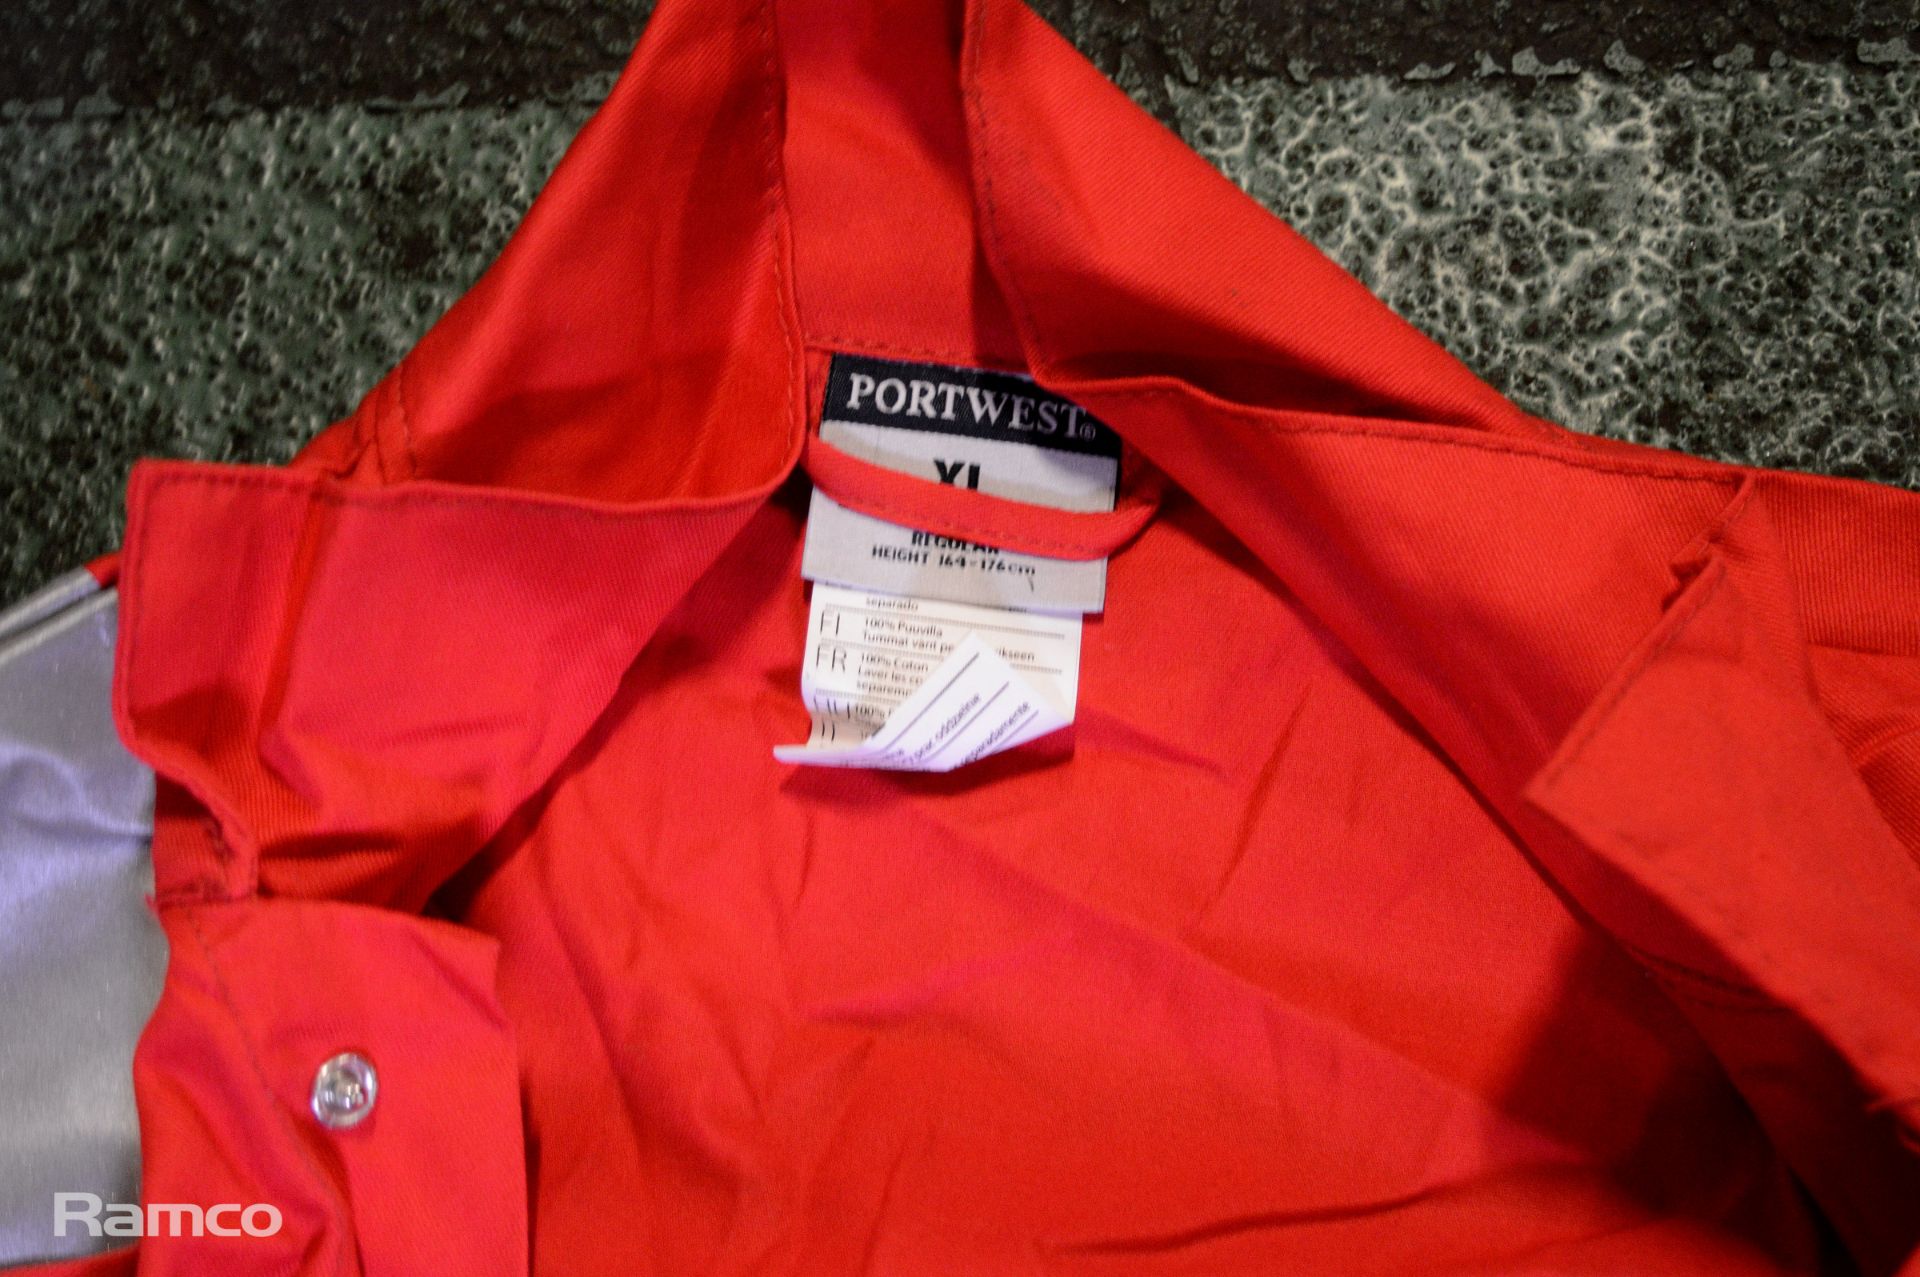 Hi-Vis workwear trousers, Small padded envelopes - Image 6 of 6